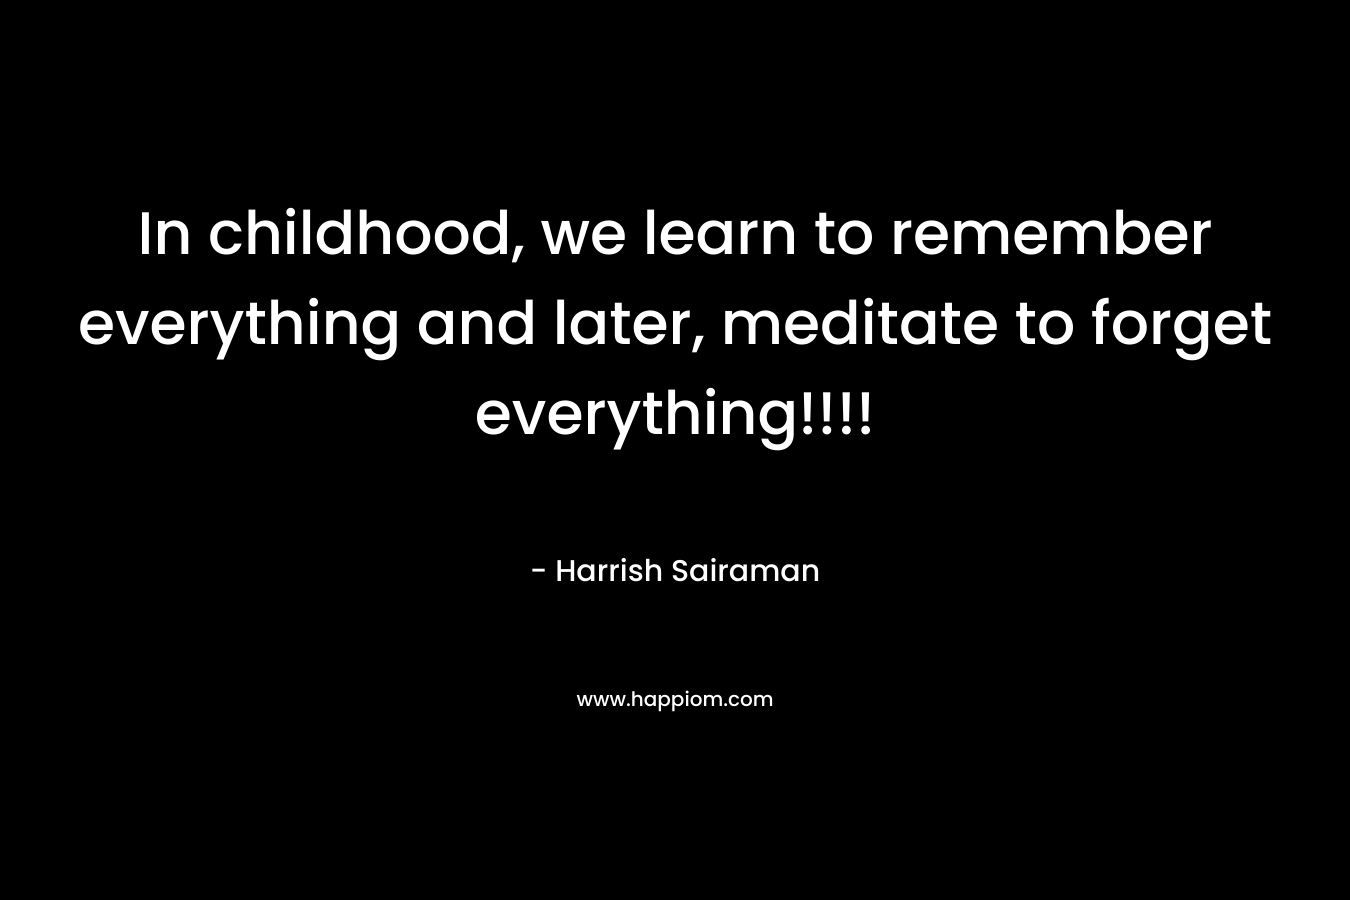 In childhood, we learn to remember everything and later, meditate to forget everything!!!!